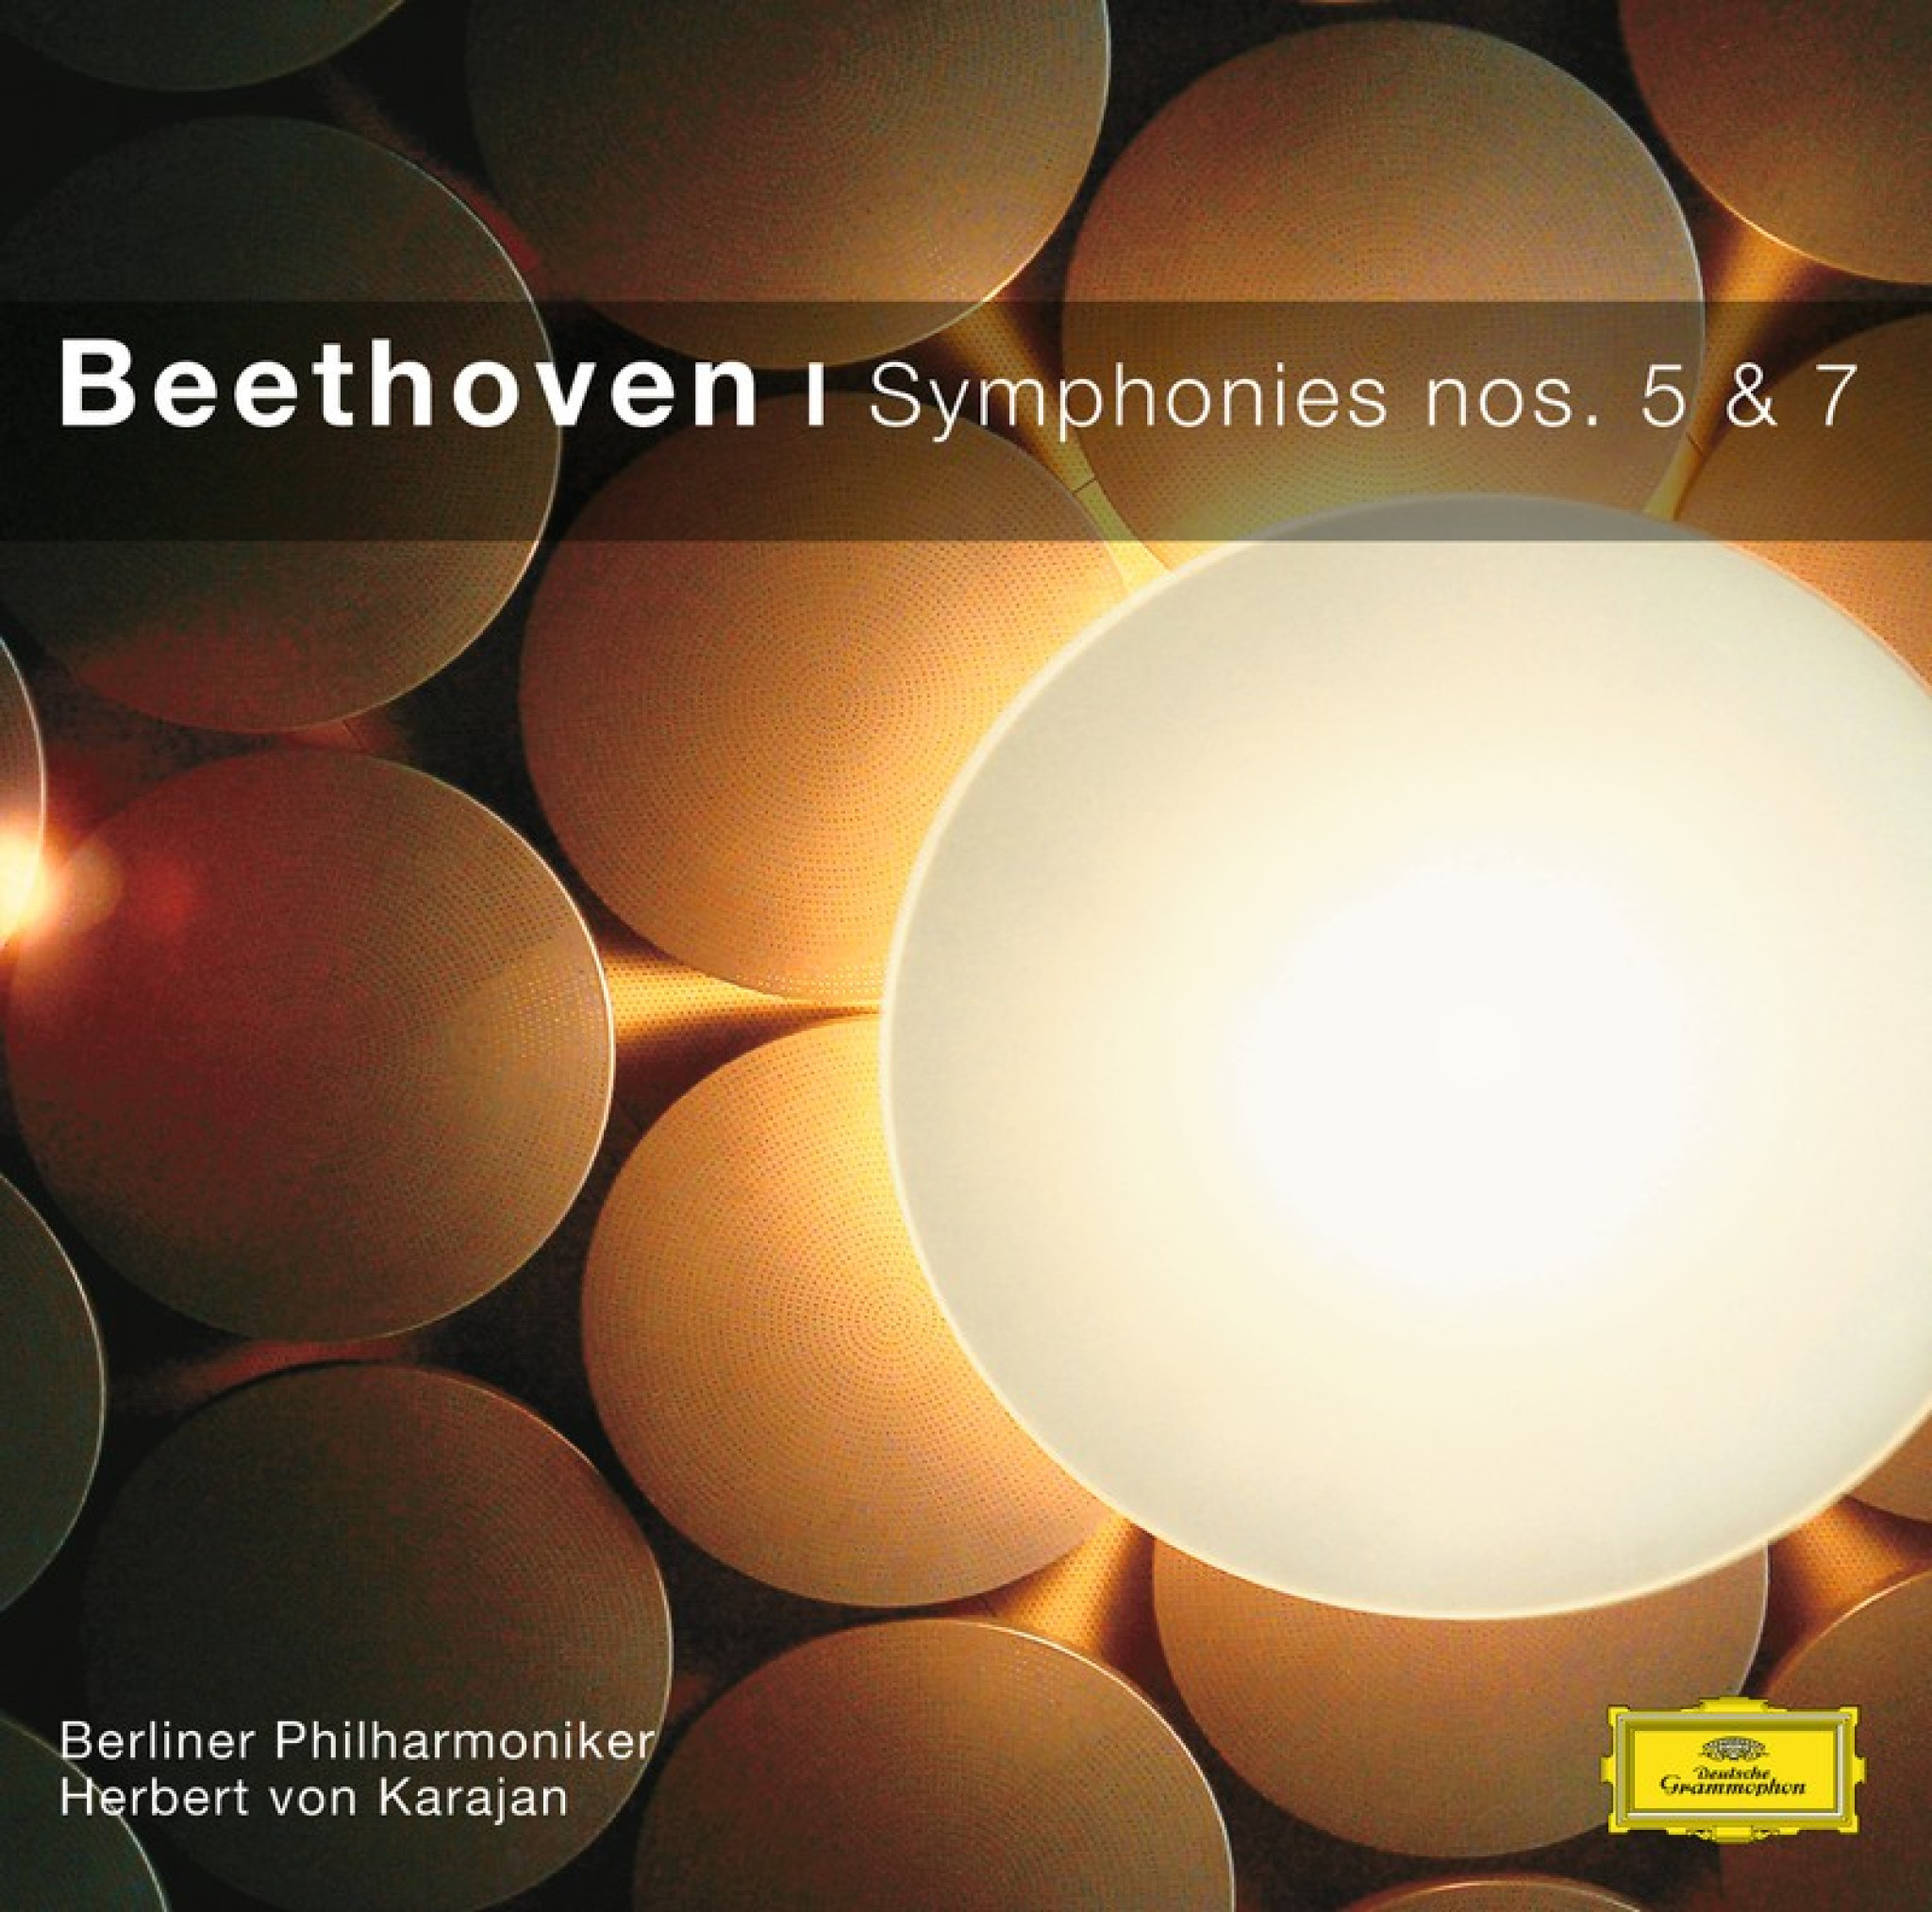 Beethoven No. 5 & 7 Classical Choice Cover 00028947775126